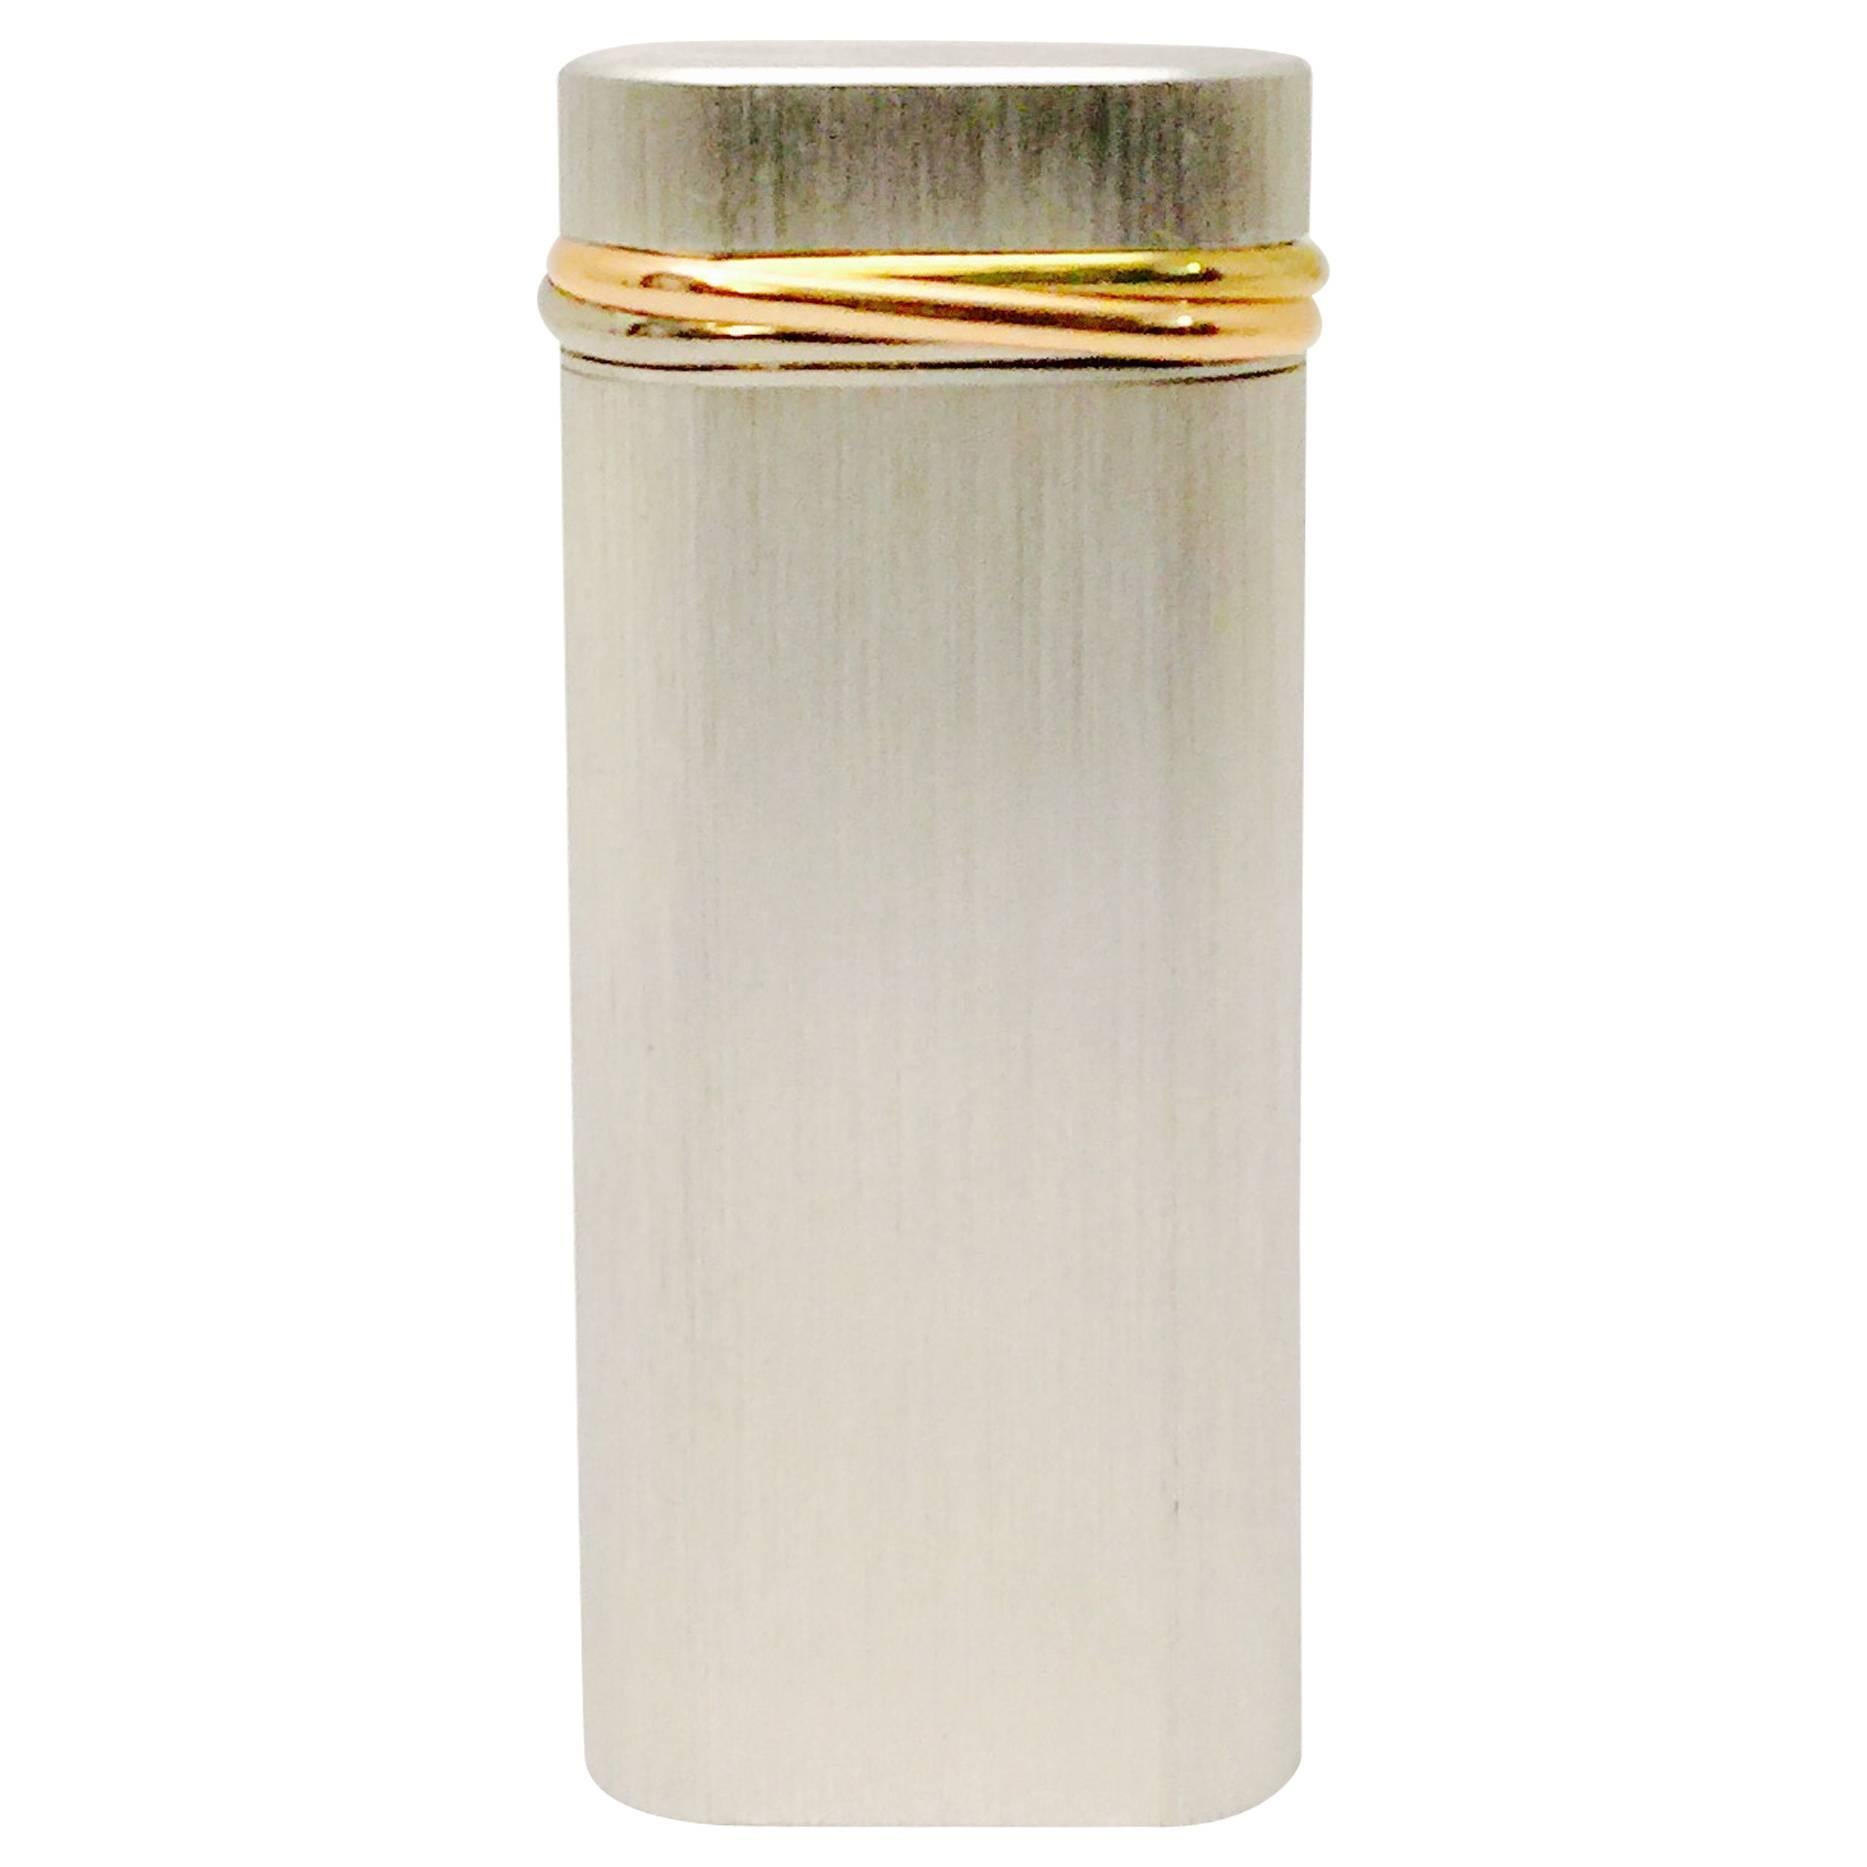 Cartier ca.1990's Lighter in Silver Plate, Brand New in Box